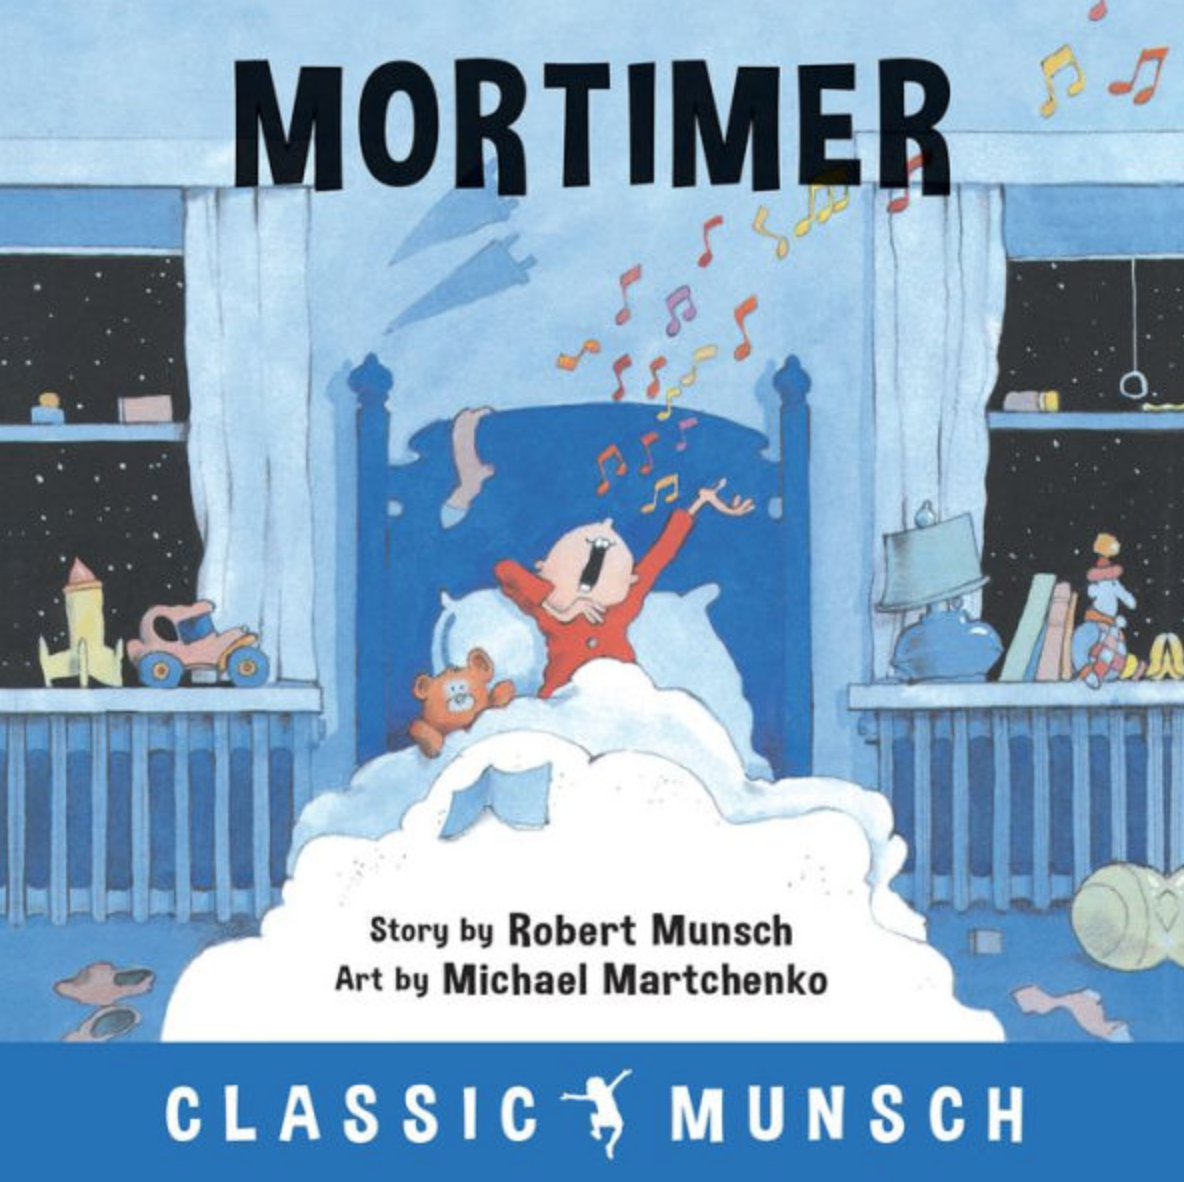 Illustrated book cover for Mortimer featuring a little boy sitting in his bed at night, singing loudly. He has light skin and is wearing red pajamas. There is a stuffed bear and a book on his bed. Other items are strewn about his room.